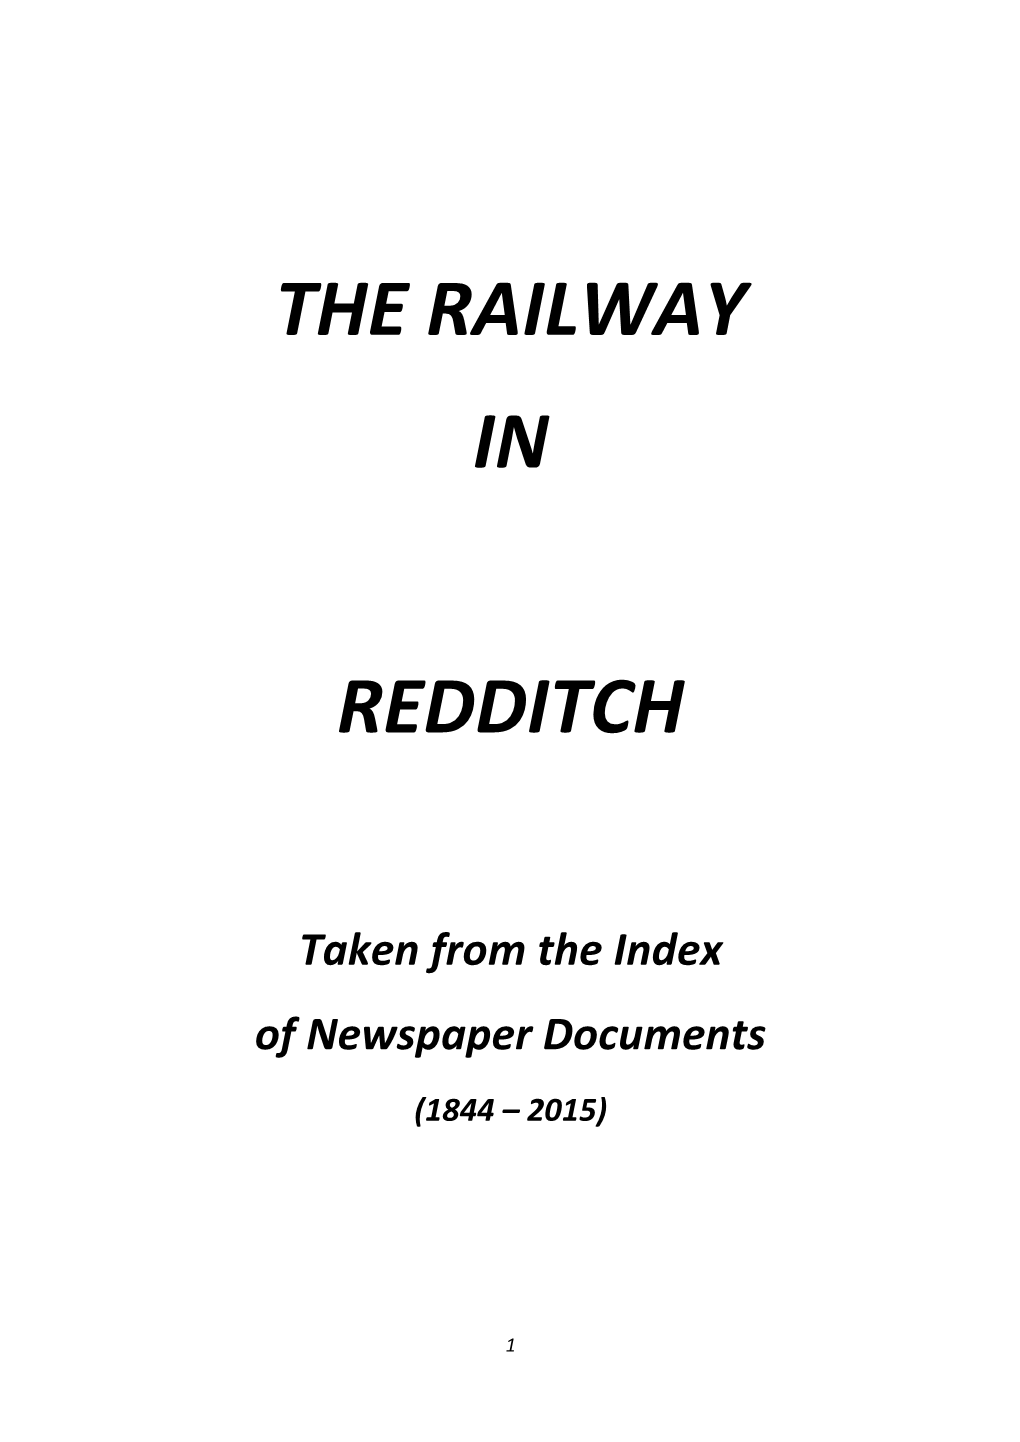 The Railway in Redditch” Documents Which Gives an Overall View of Life in Redditch Through the Years, 1844-2015